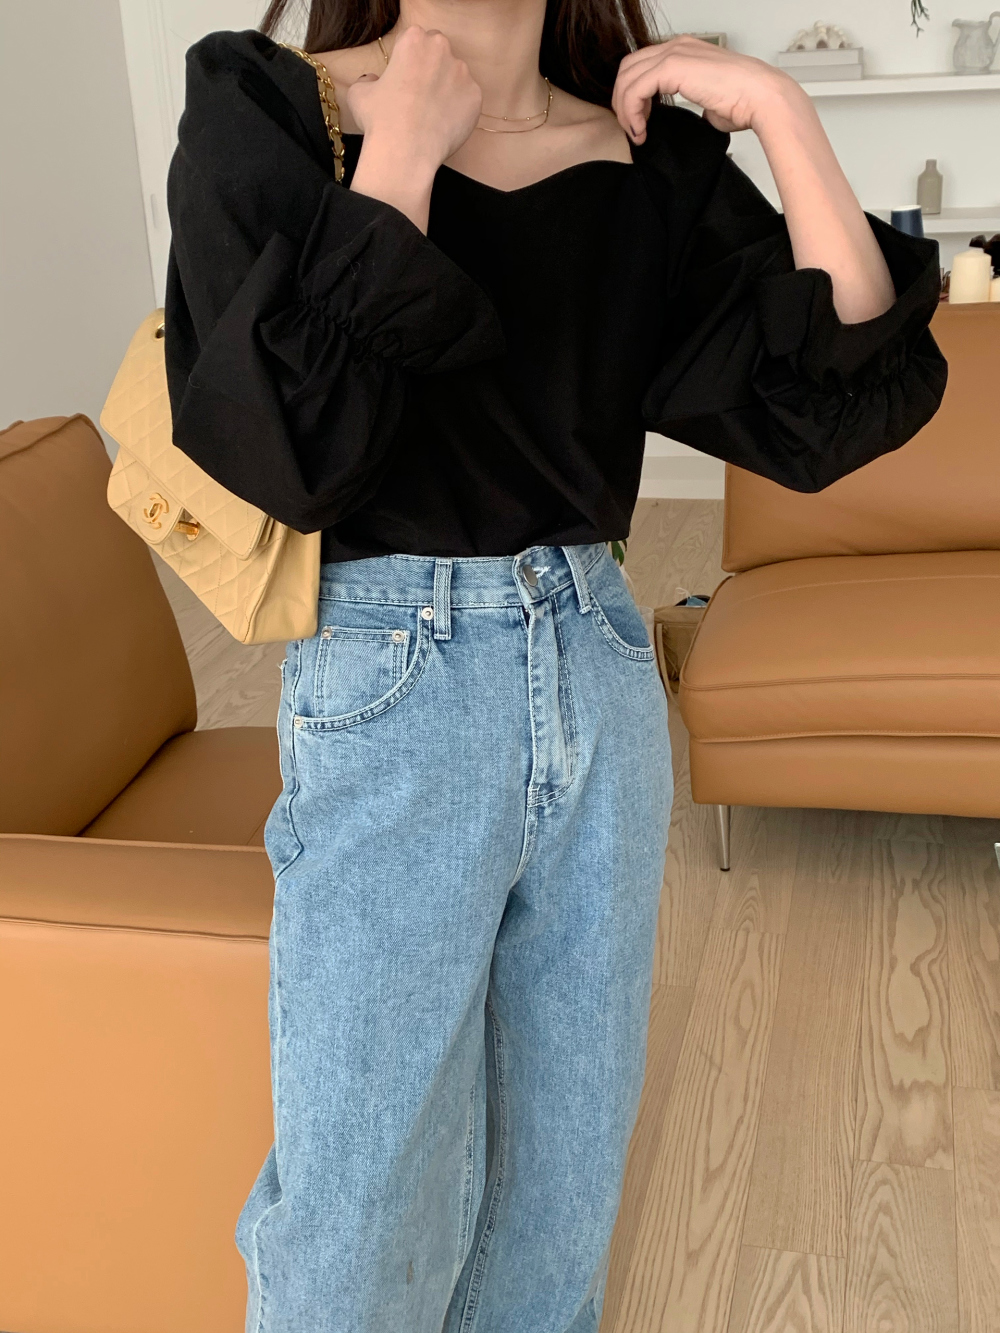 Simple France style tops Korean style shirt